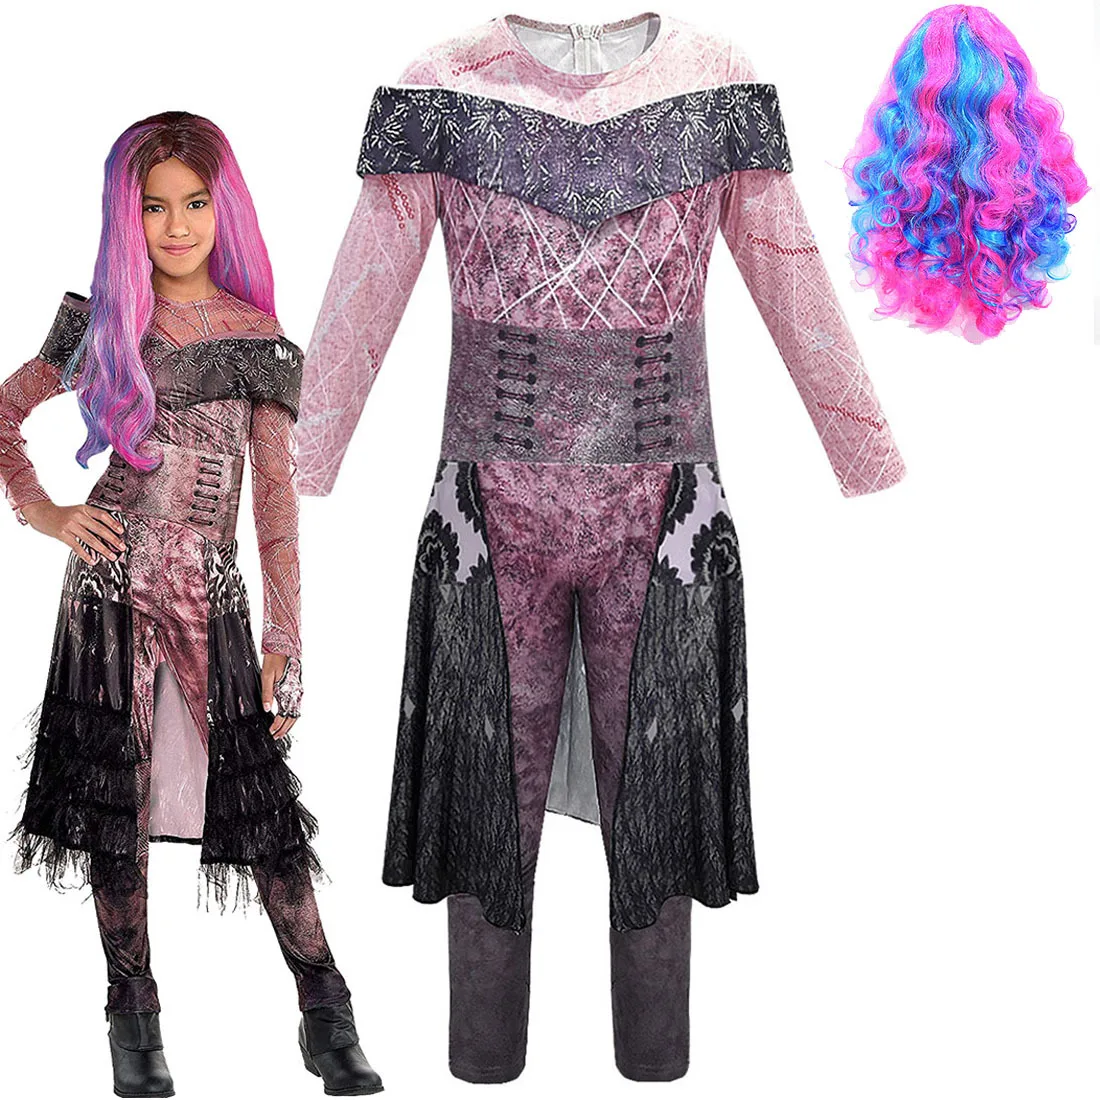 

Descendants 3 Audrey Costumes Dress Halloween Costumes Wig For Kids Girls Fancy Party Costume Evie Mal Cosplay Fantasia Costumes